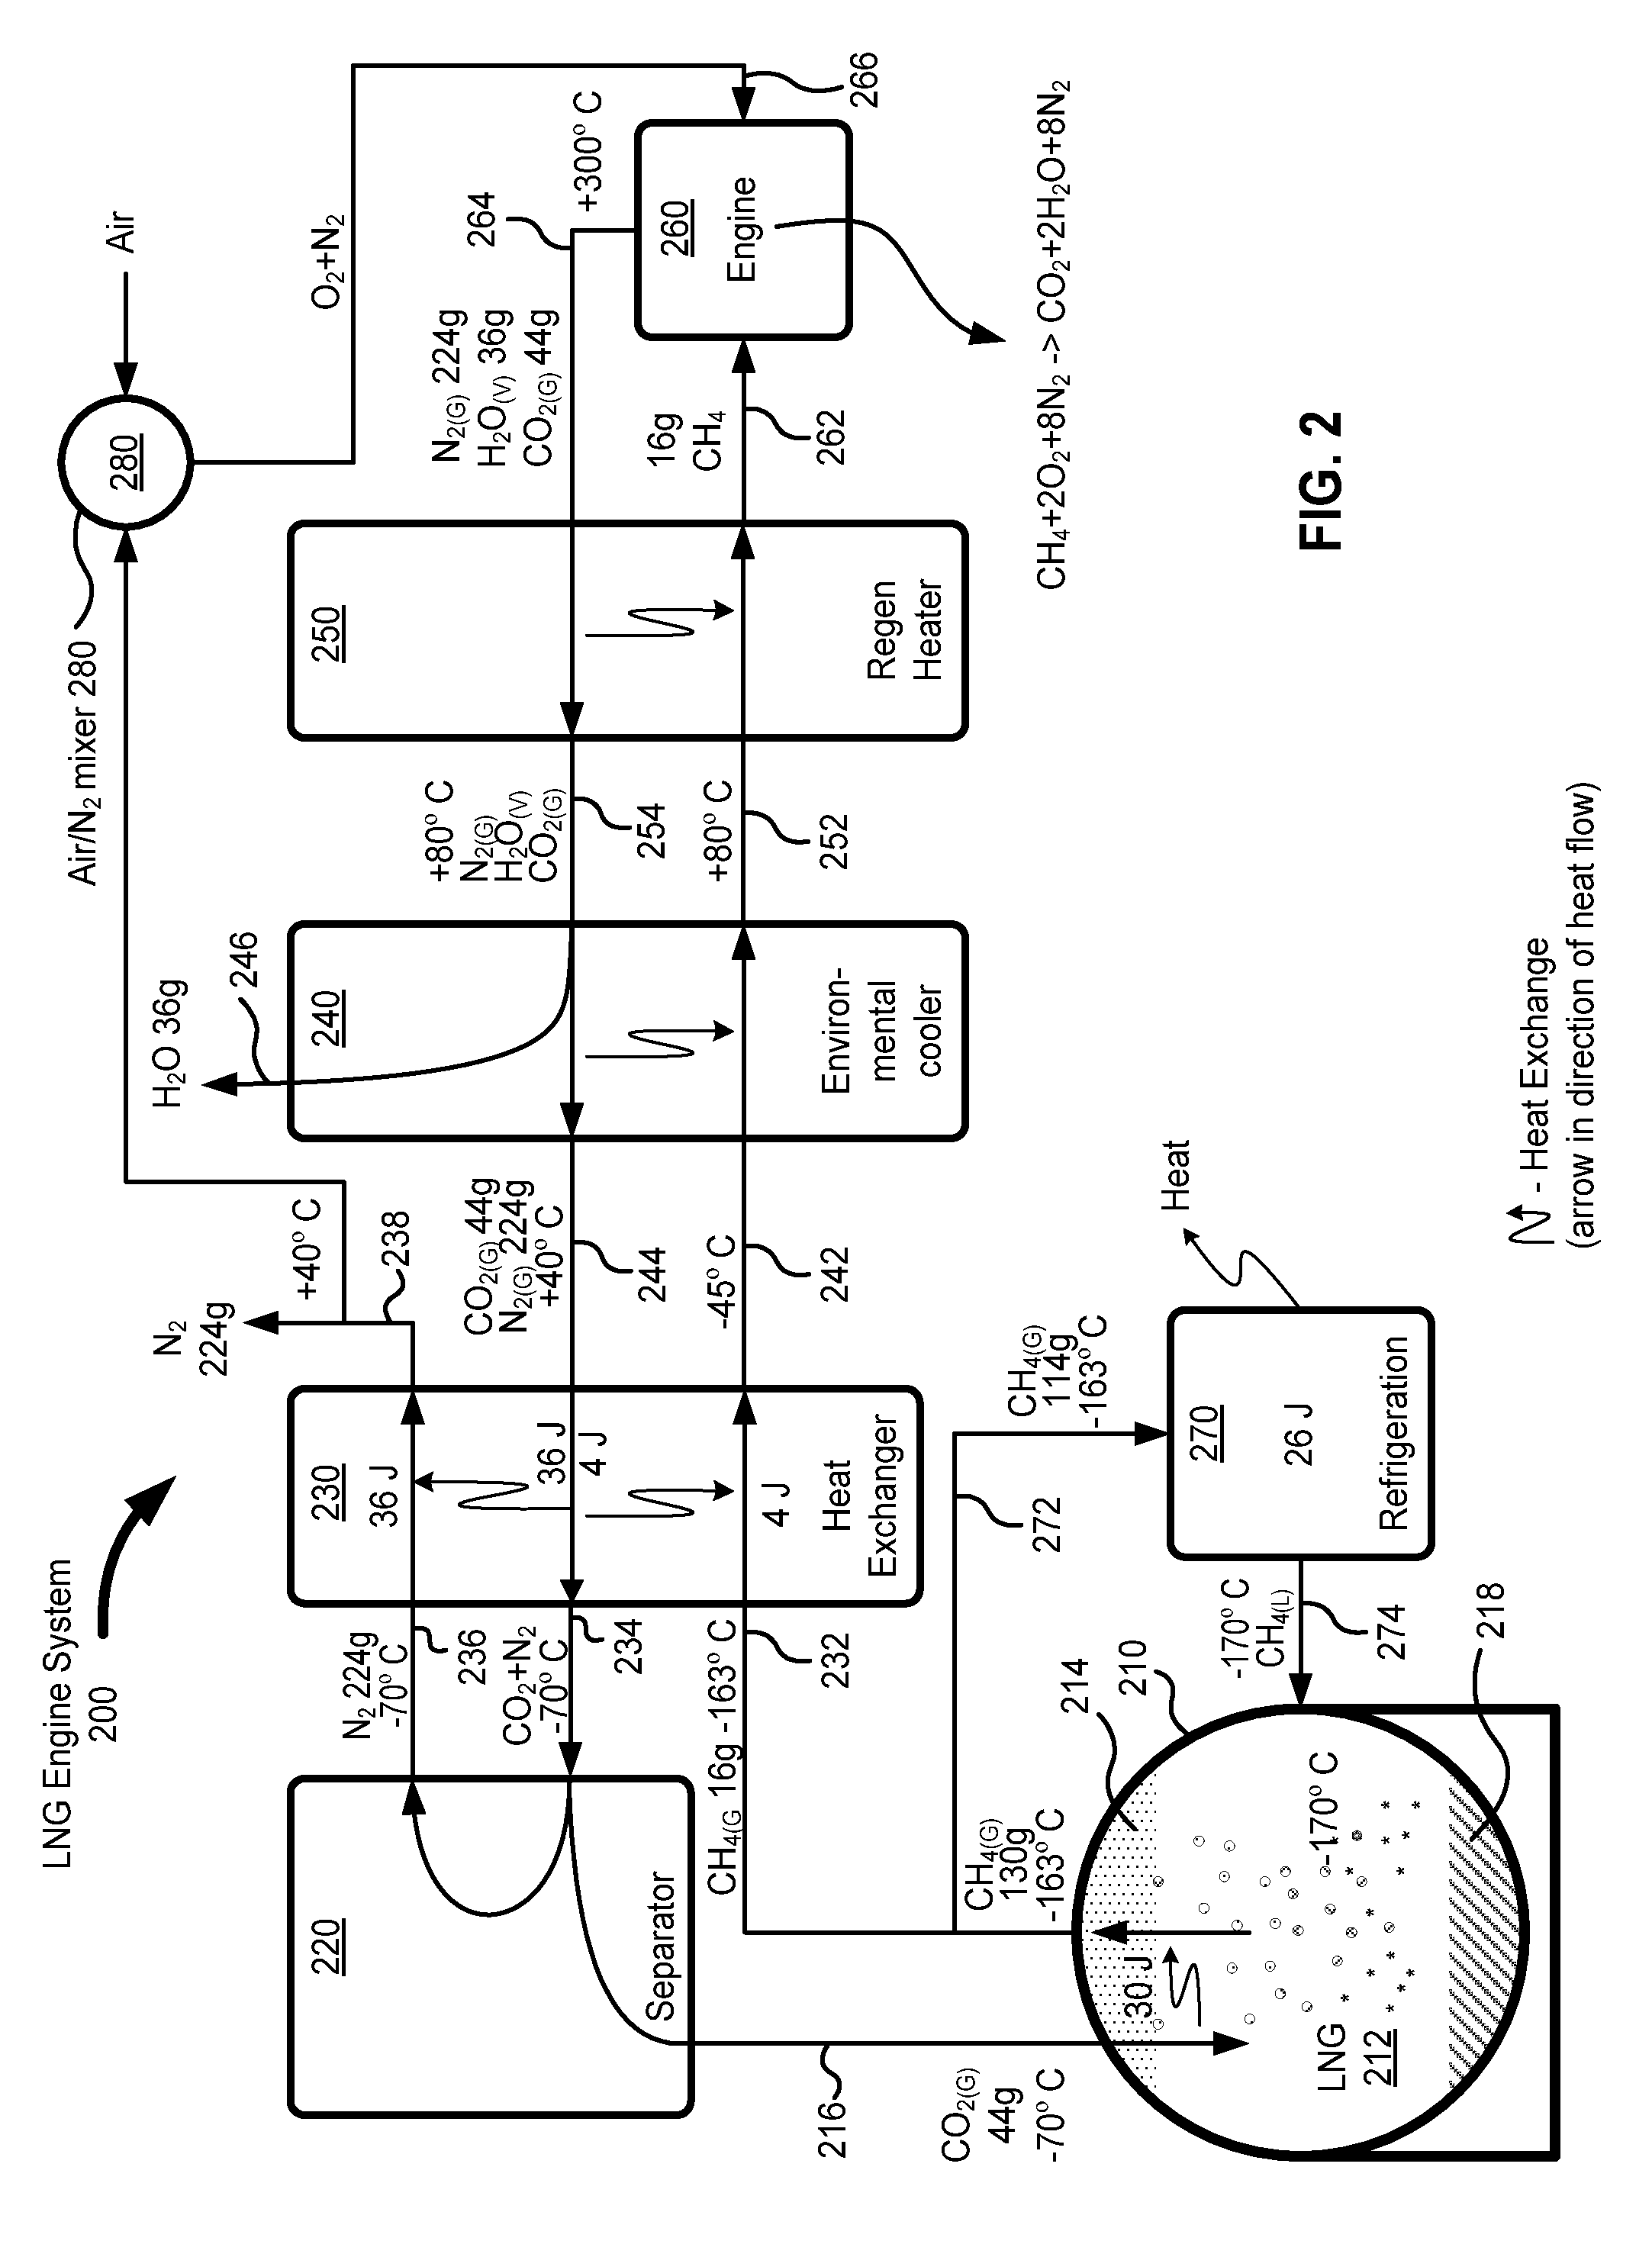 System and method for sequestering emissions from engines